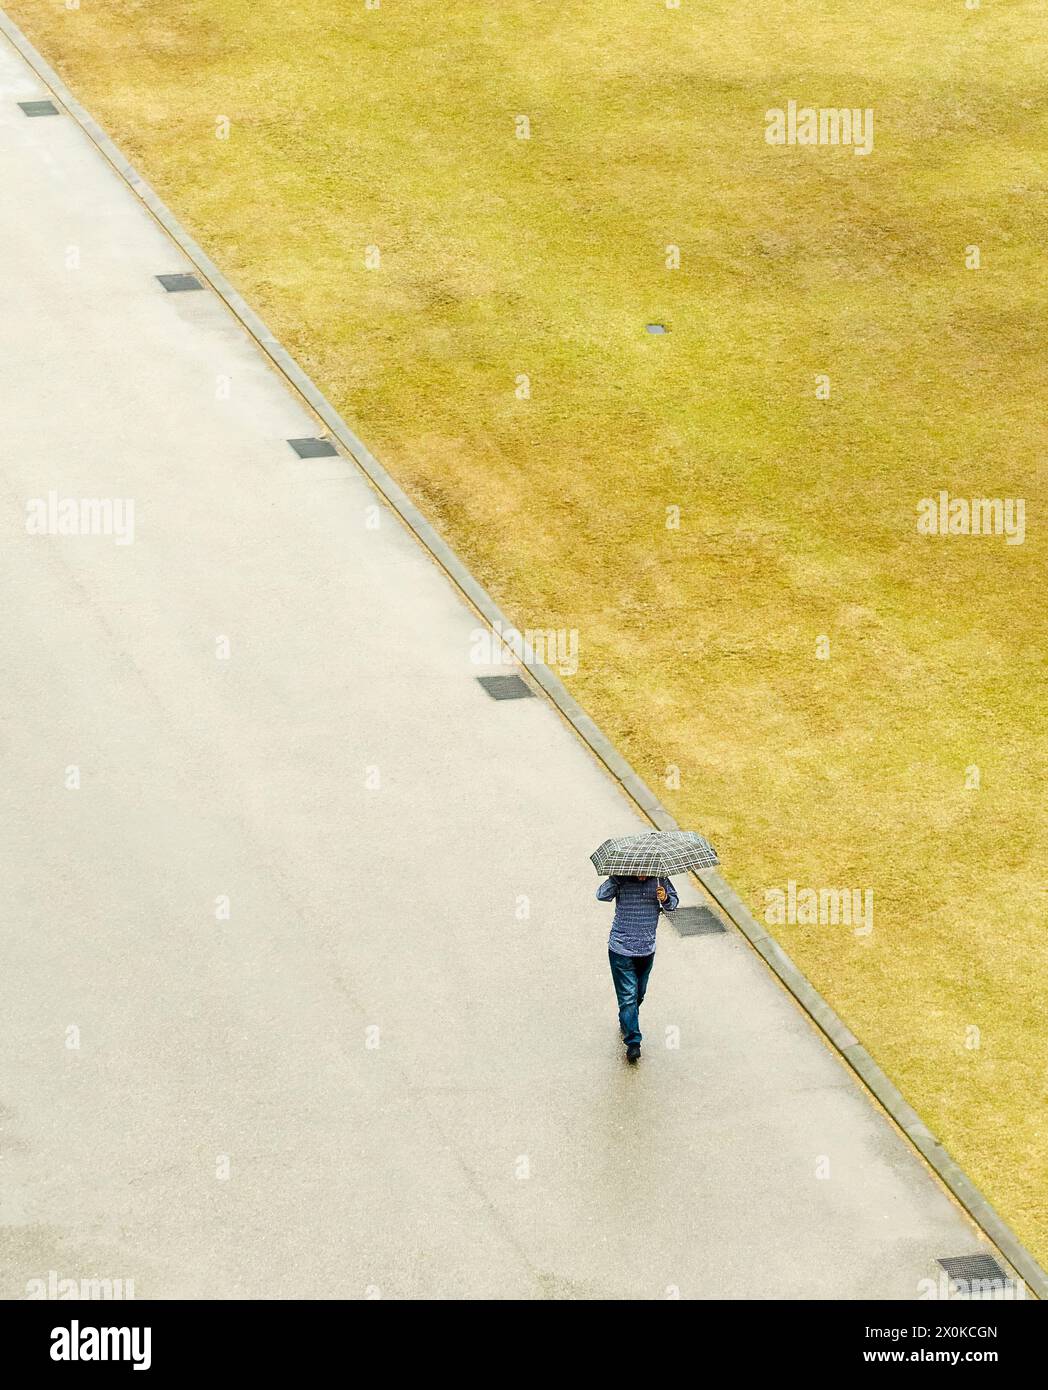 A person is walking down a sidewalk with an umbrella. The sky is cloudy and the grass is dry Stock Photo